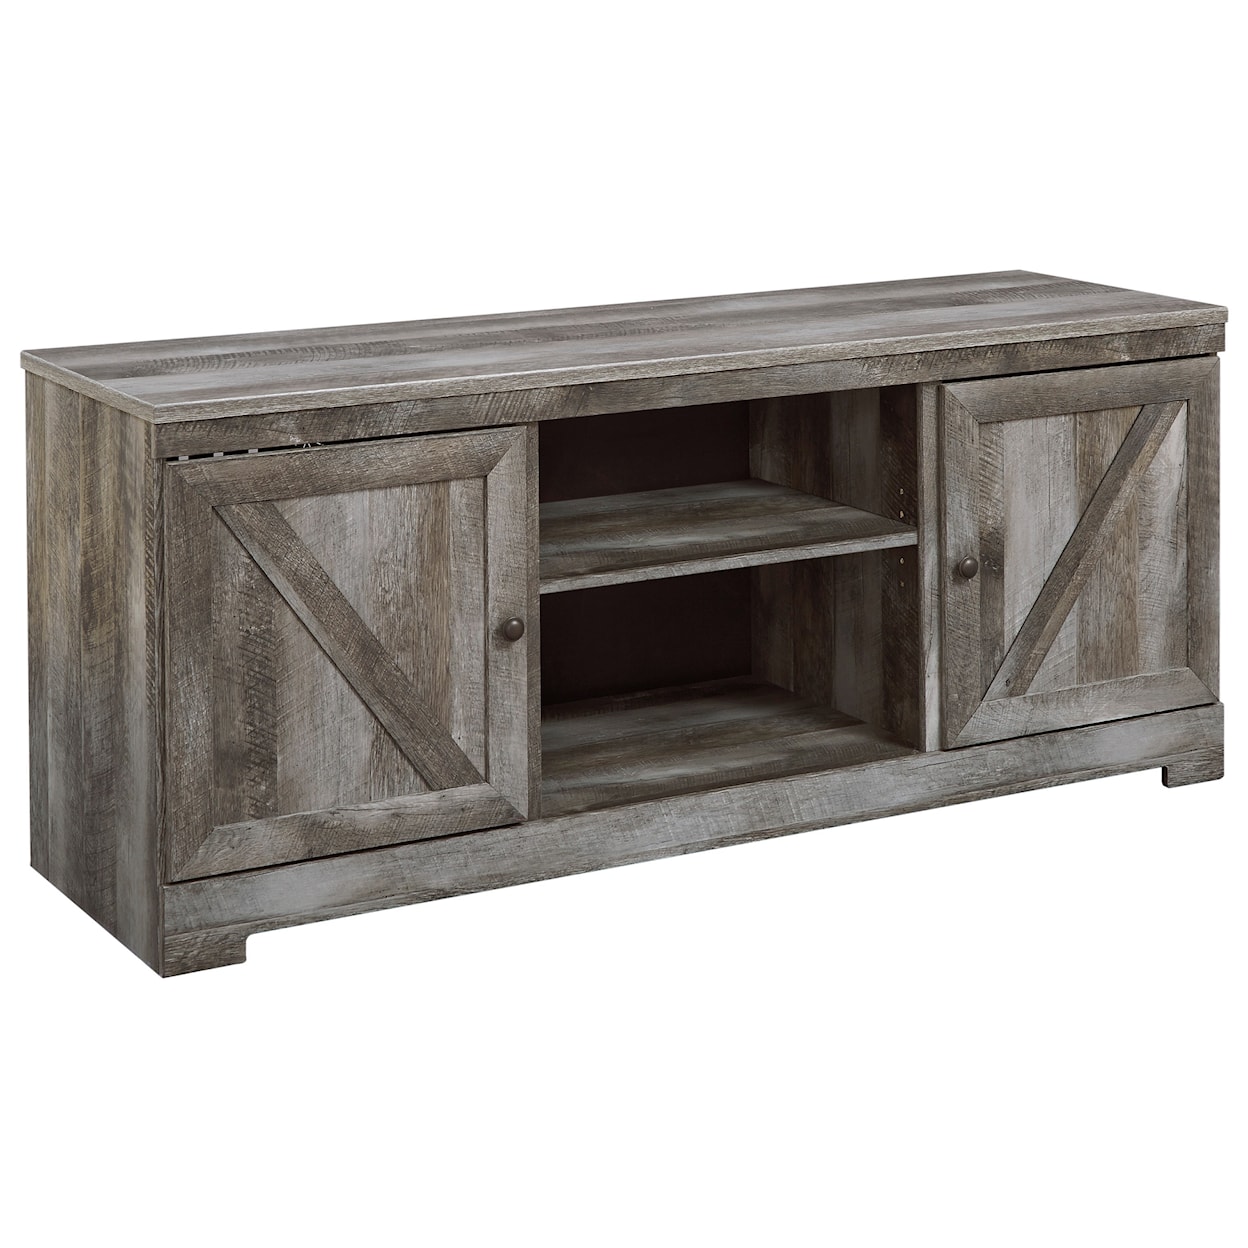 Signature Design by Ashley Wynnlow TV Stand